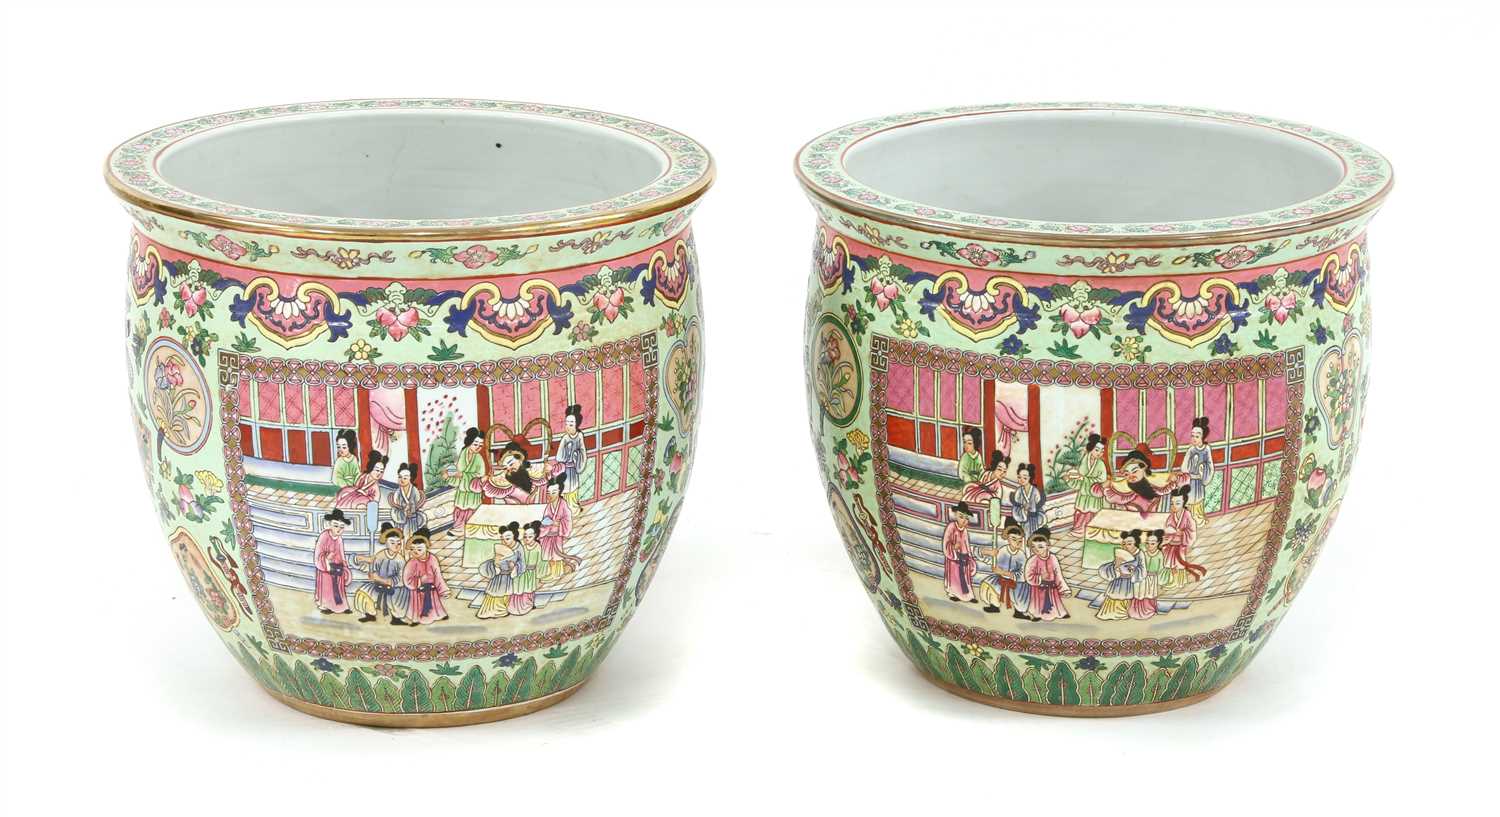 Lot 441 - A pair of 20th century Chinese famille rose fish bowls